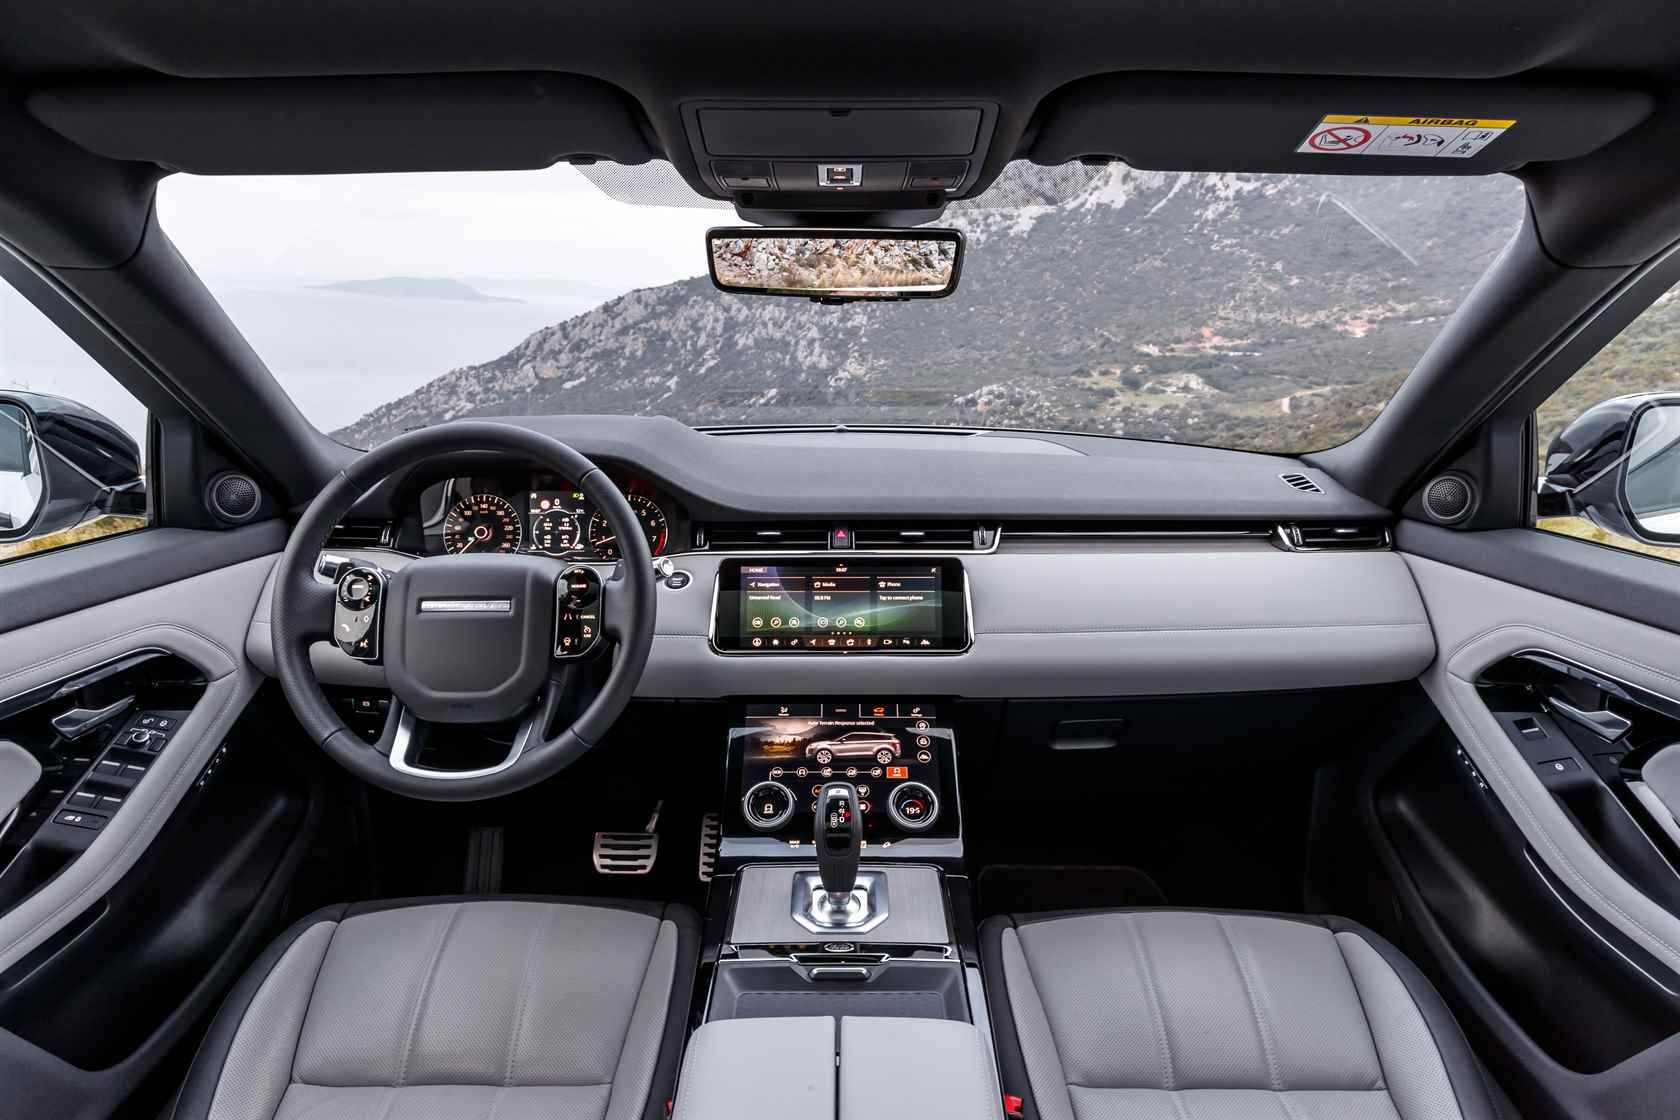 The Evoque offers a luxurious interior.